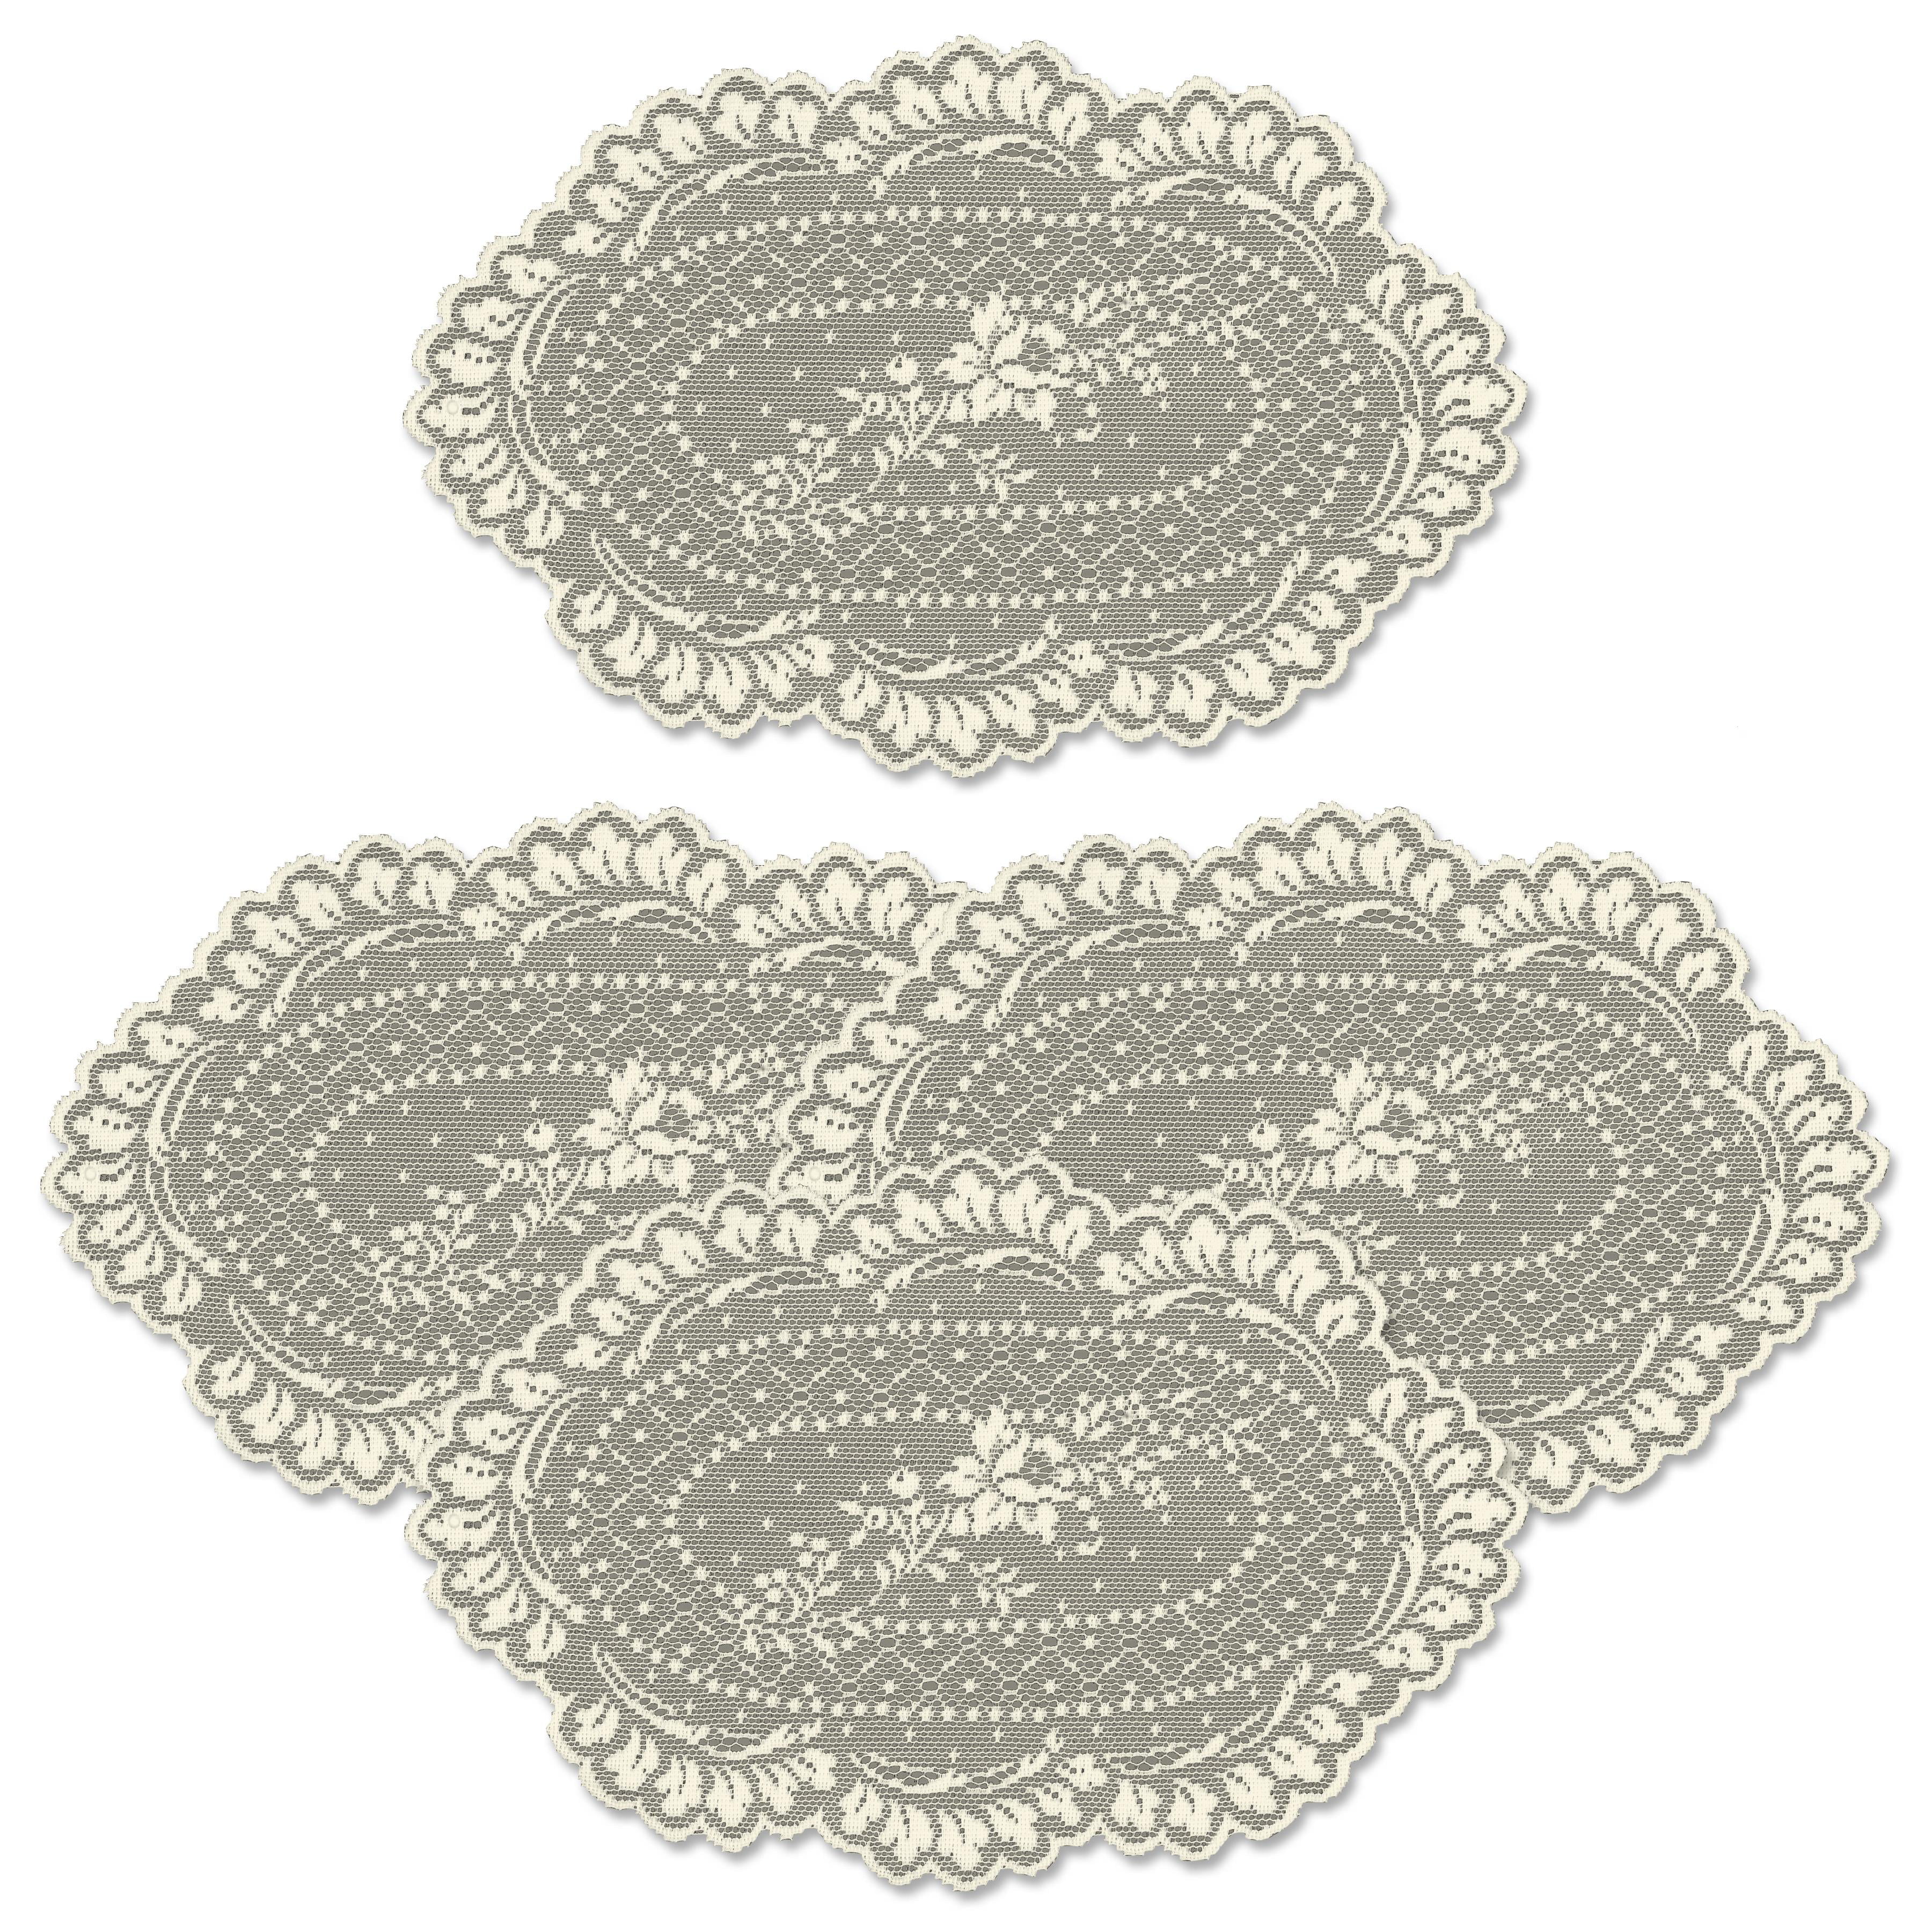 Off-White Vintage New Doilies Doily Placemat Heritage Lace Rose Placemats Ecru 